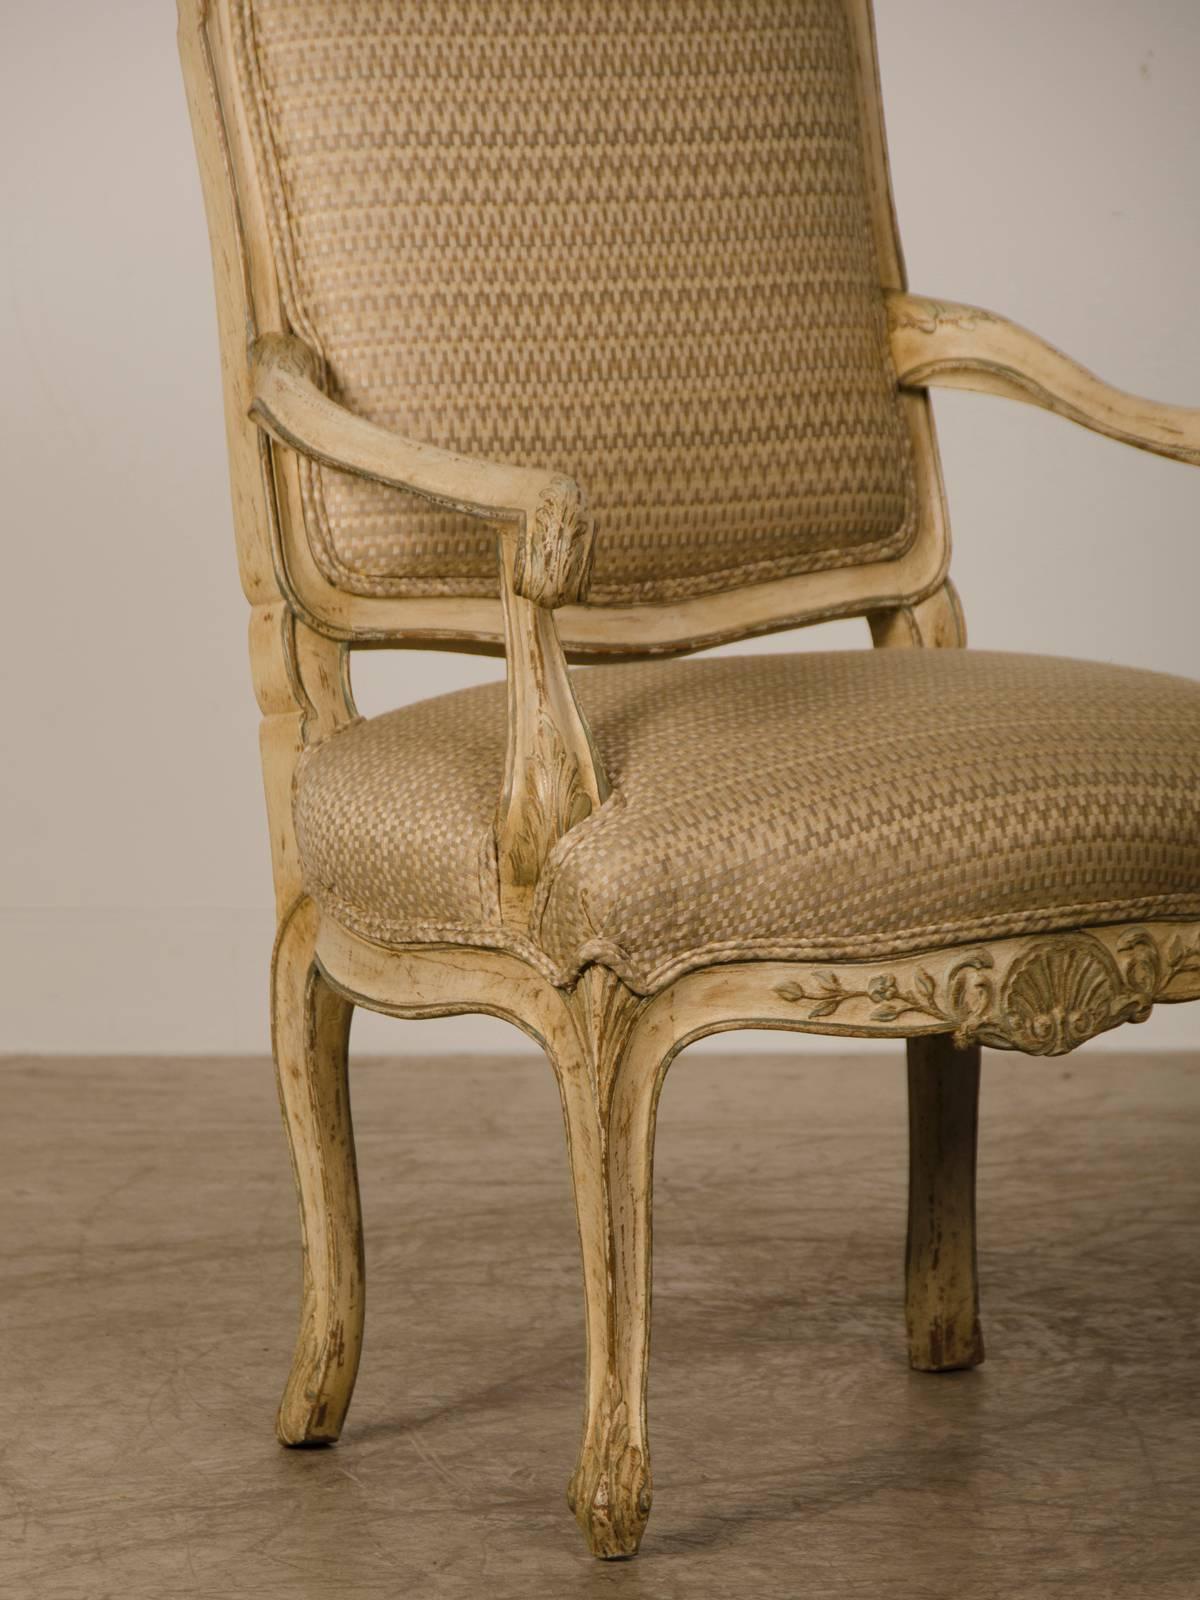 Pair of Louis XV Period Italian Armchairs, Original Painted Finish, circa 1770 In Excellent Condition For Sale In Houston, TX